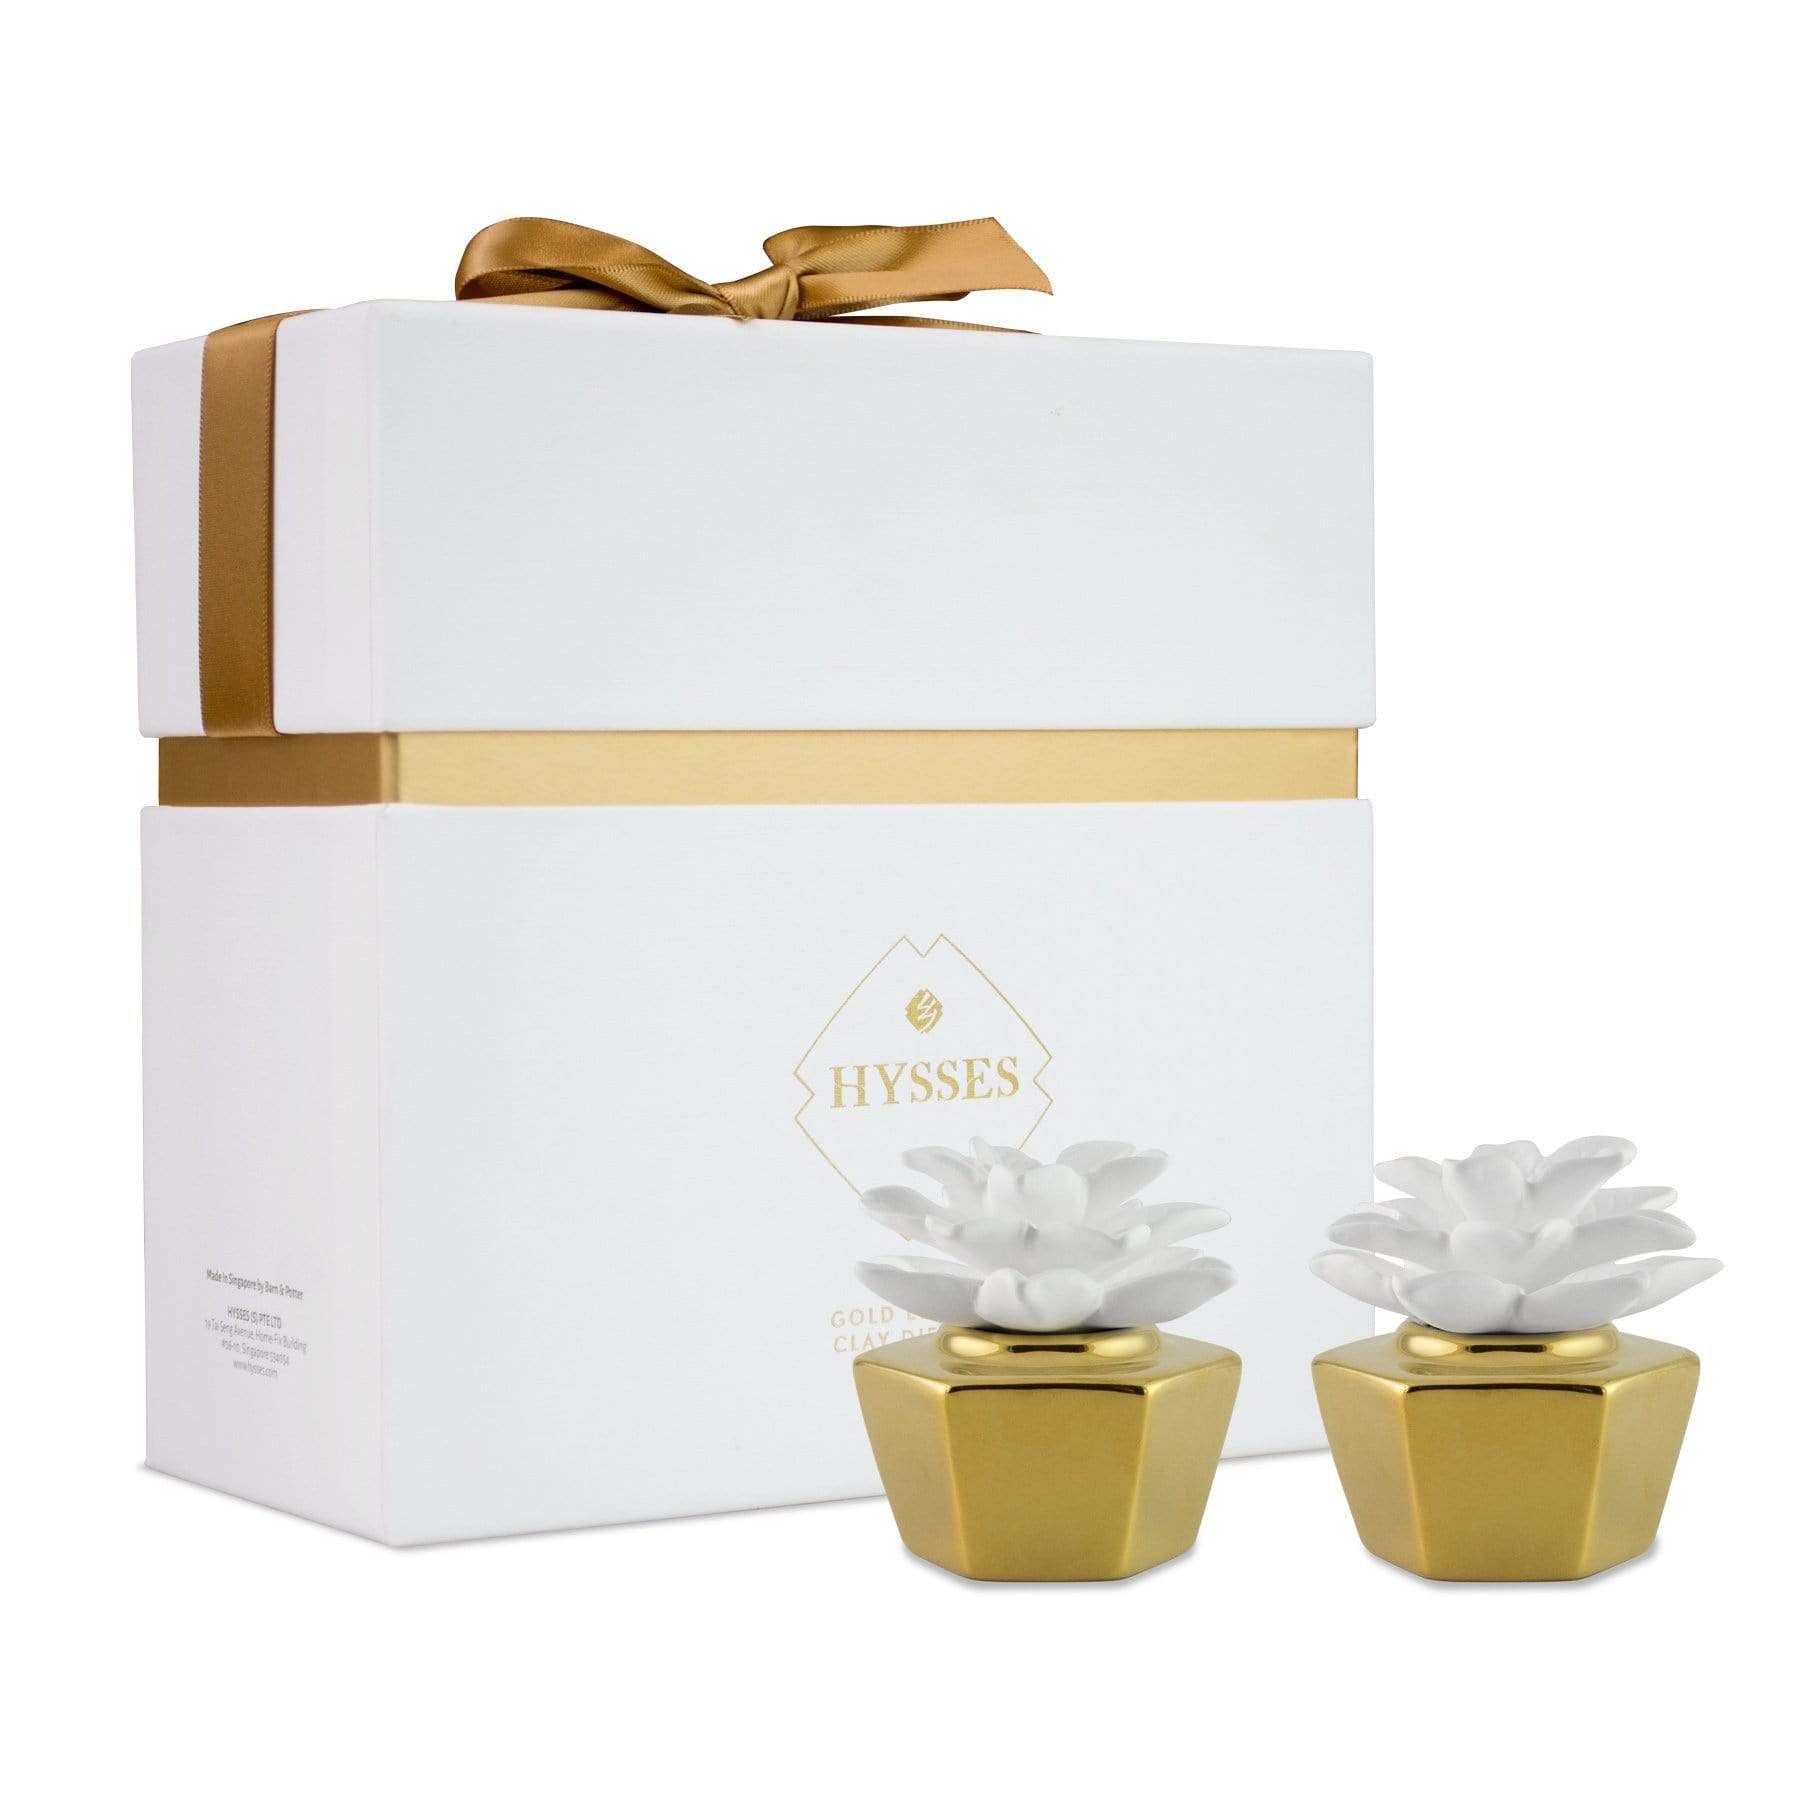 Hysses Home Scents Default Elegance Gold Clay Diffuser Set of 2